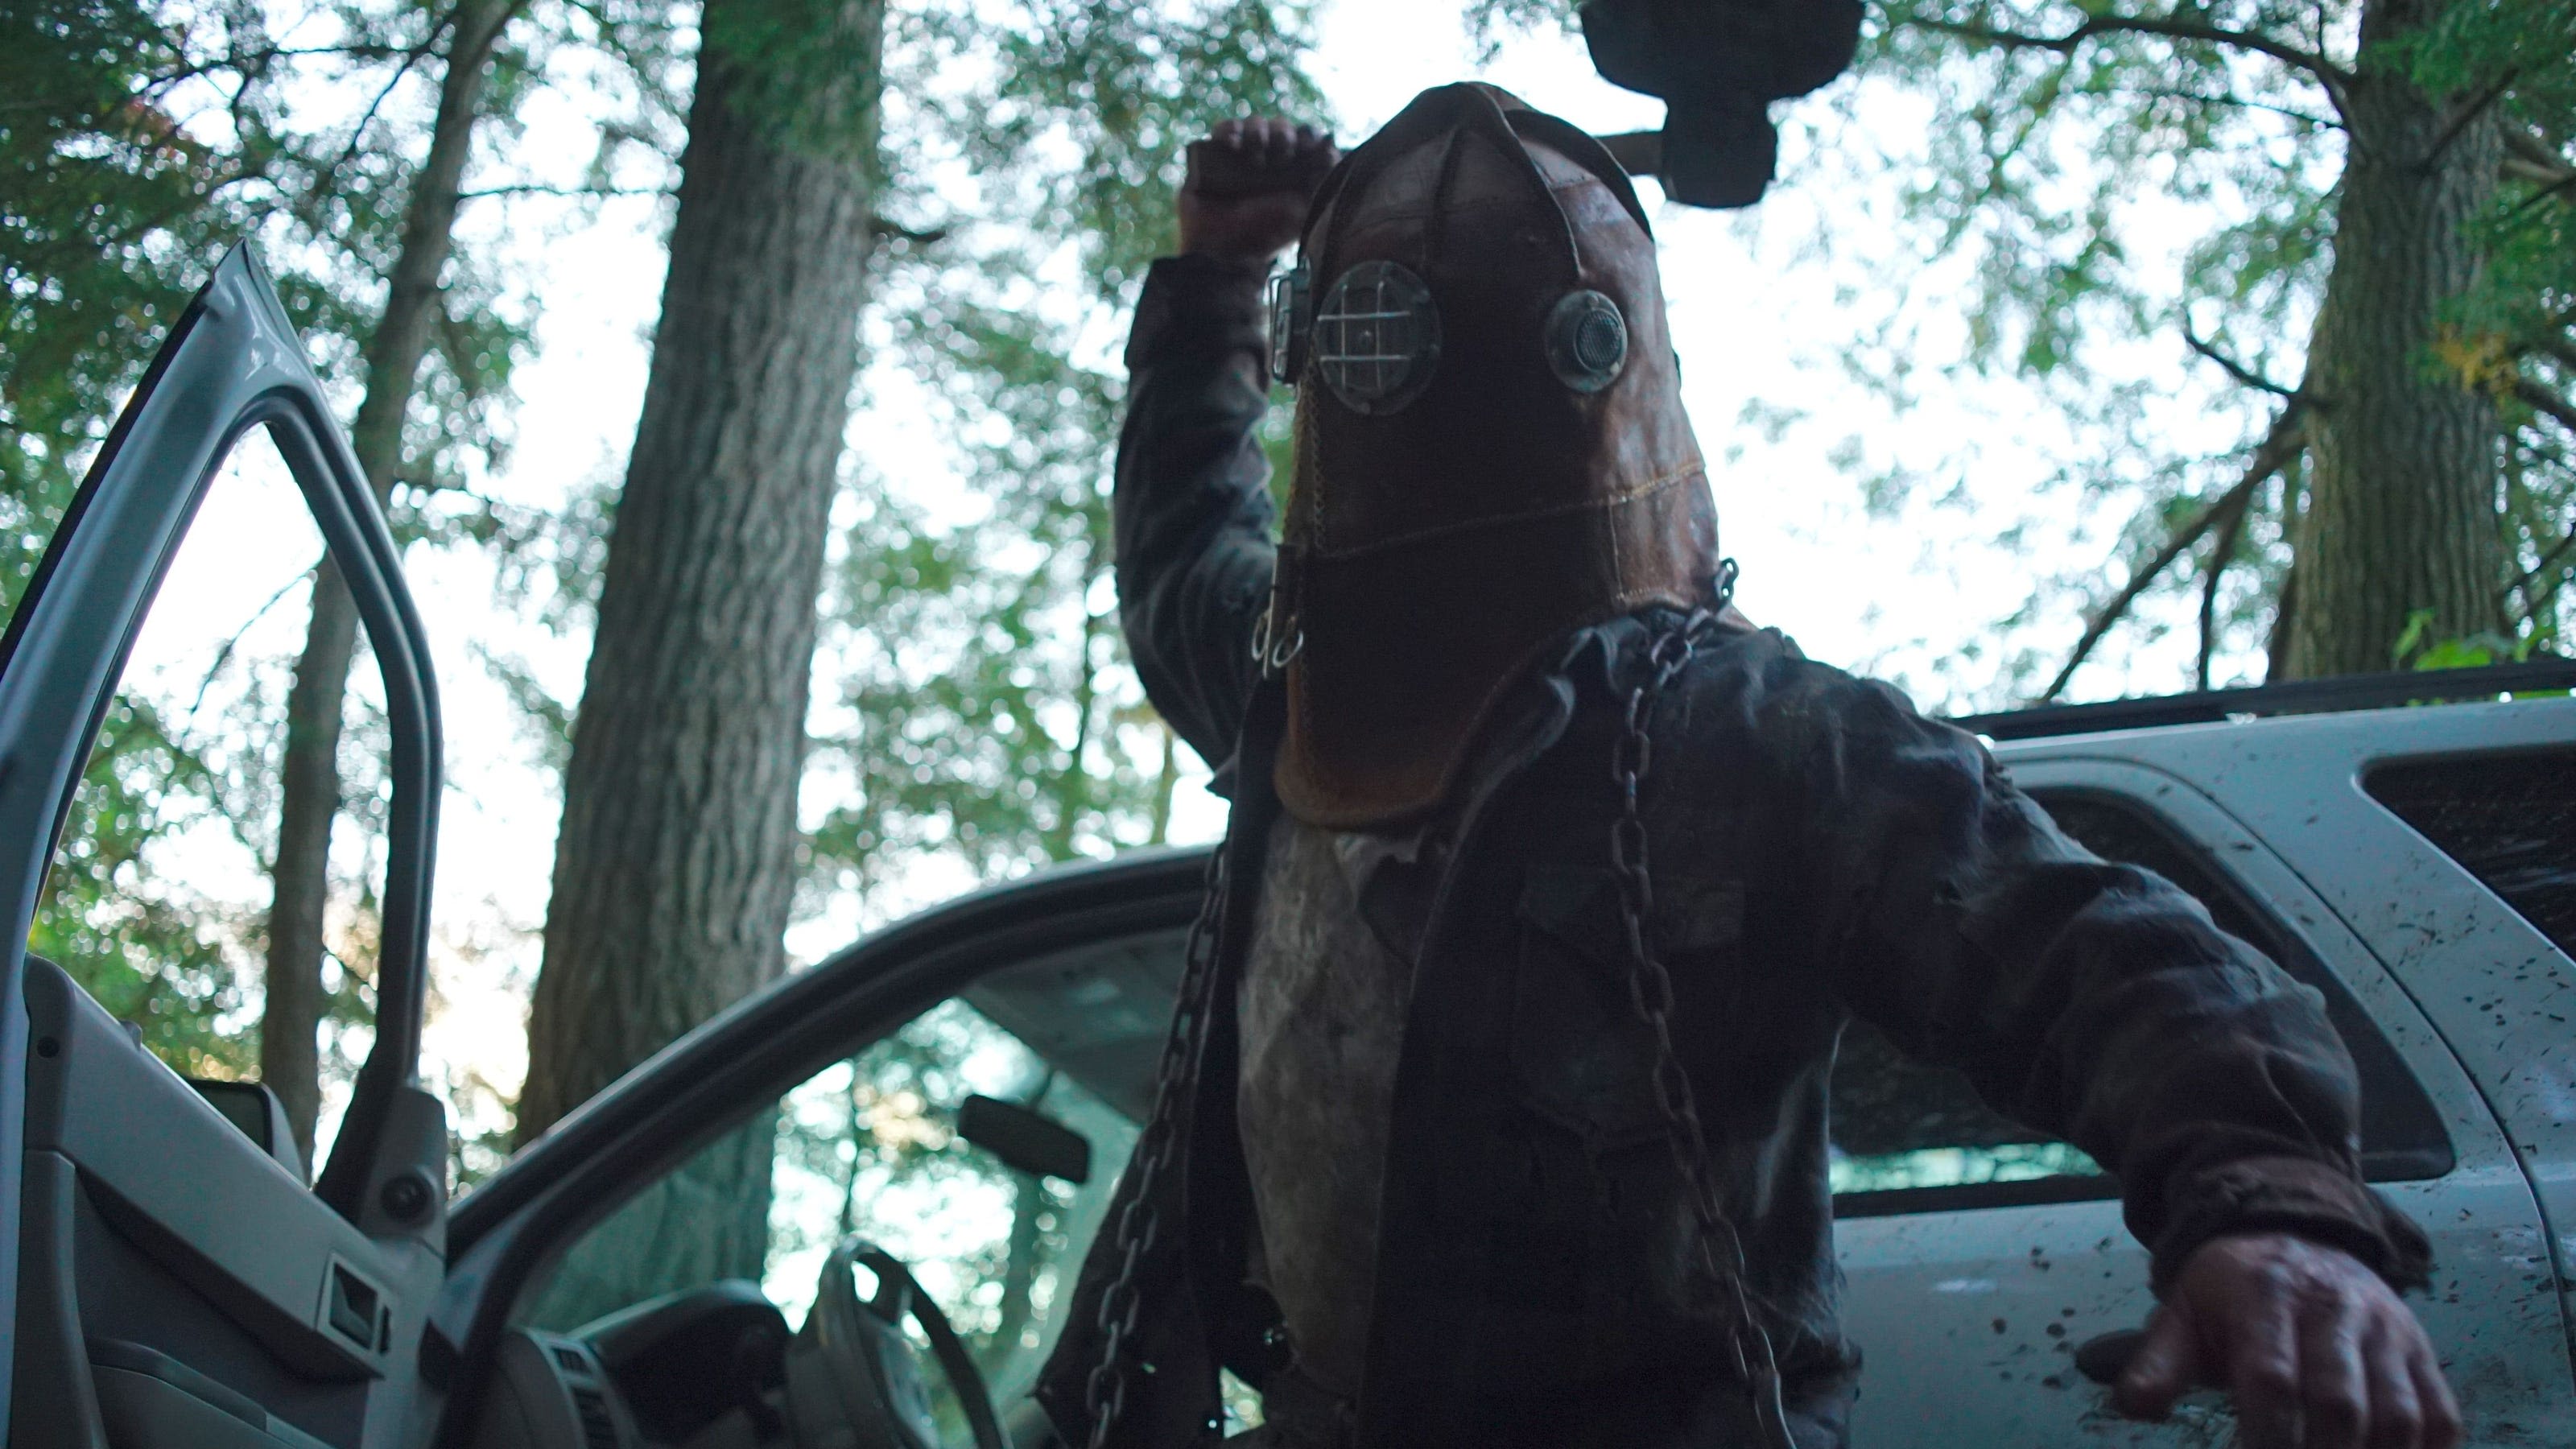 'In a Violent Nature' review: Slasher told from killer's point of view